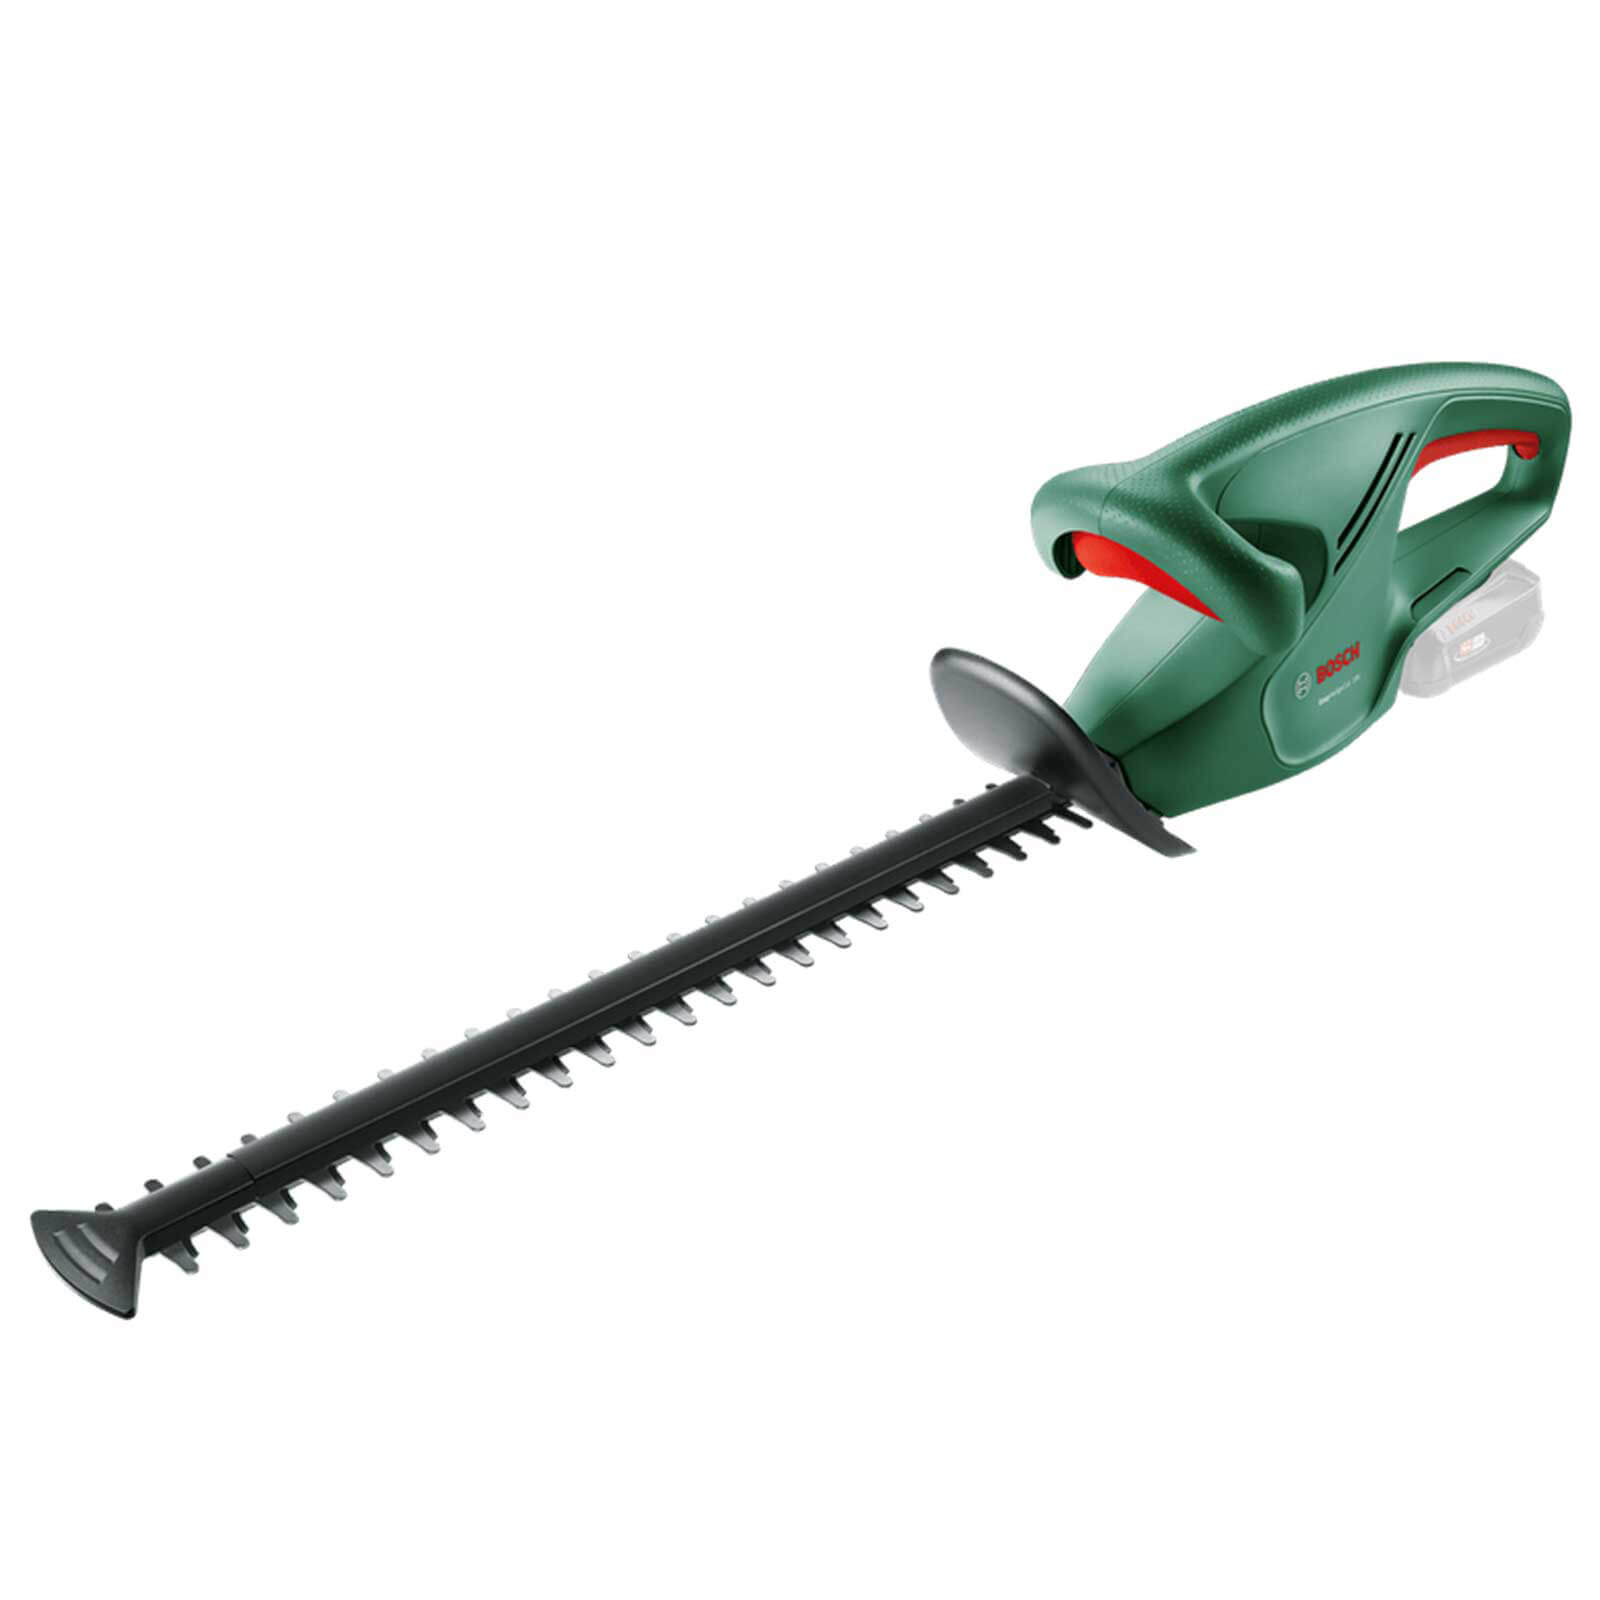 Photo of Bosch Easyhedgecut 18-45 18v Cordless Hedge Trimmer 450mm No Batteries No Charger